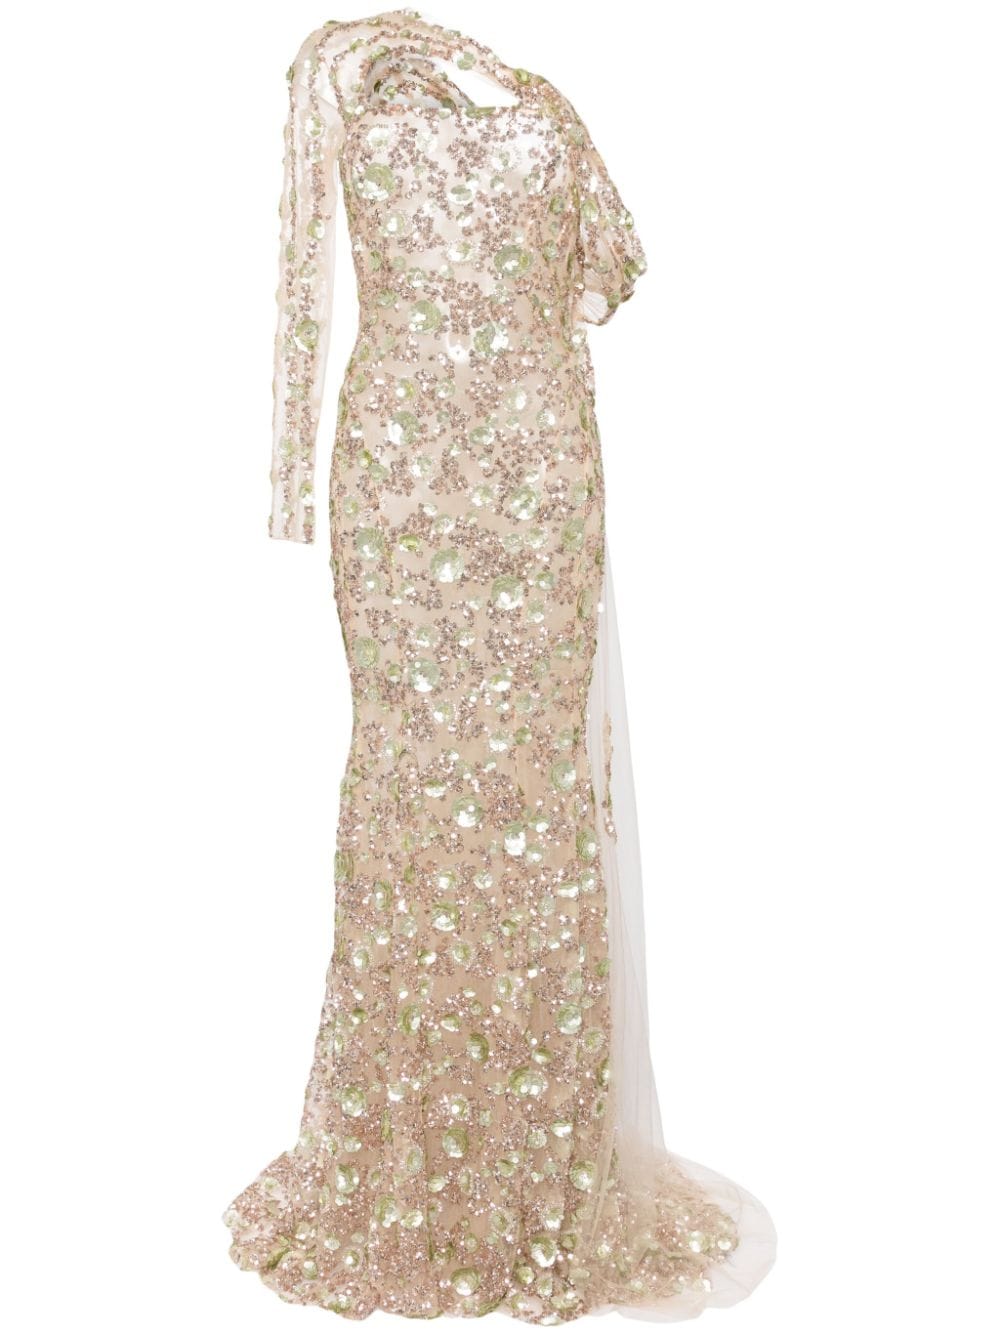 Saiid Kobeisy Beaded One-shoulder Gown In Gold